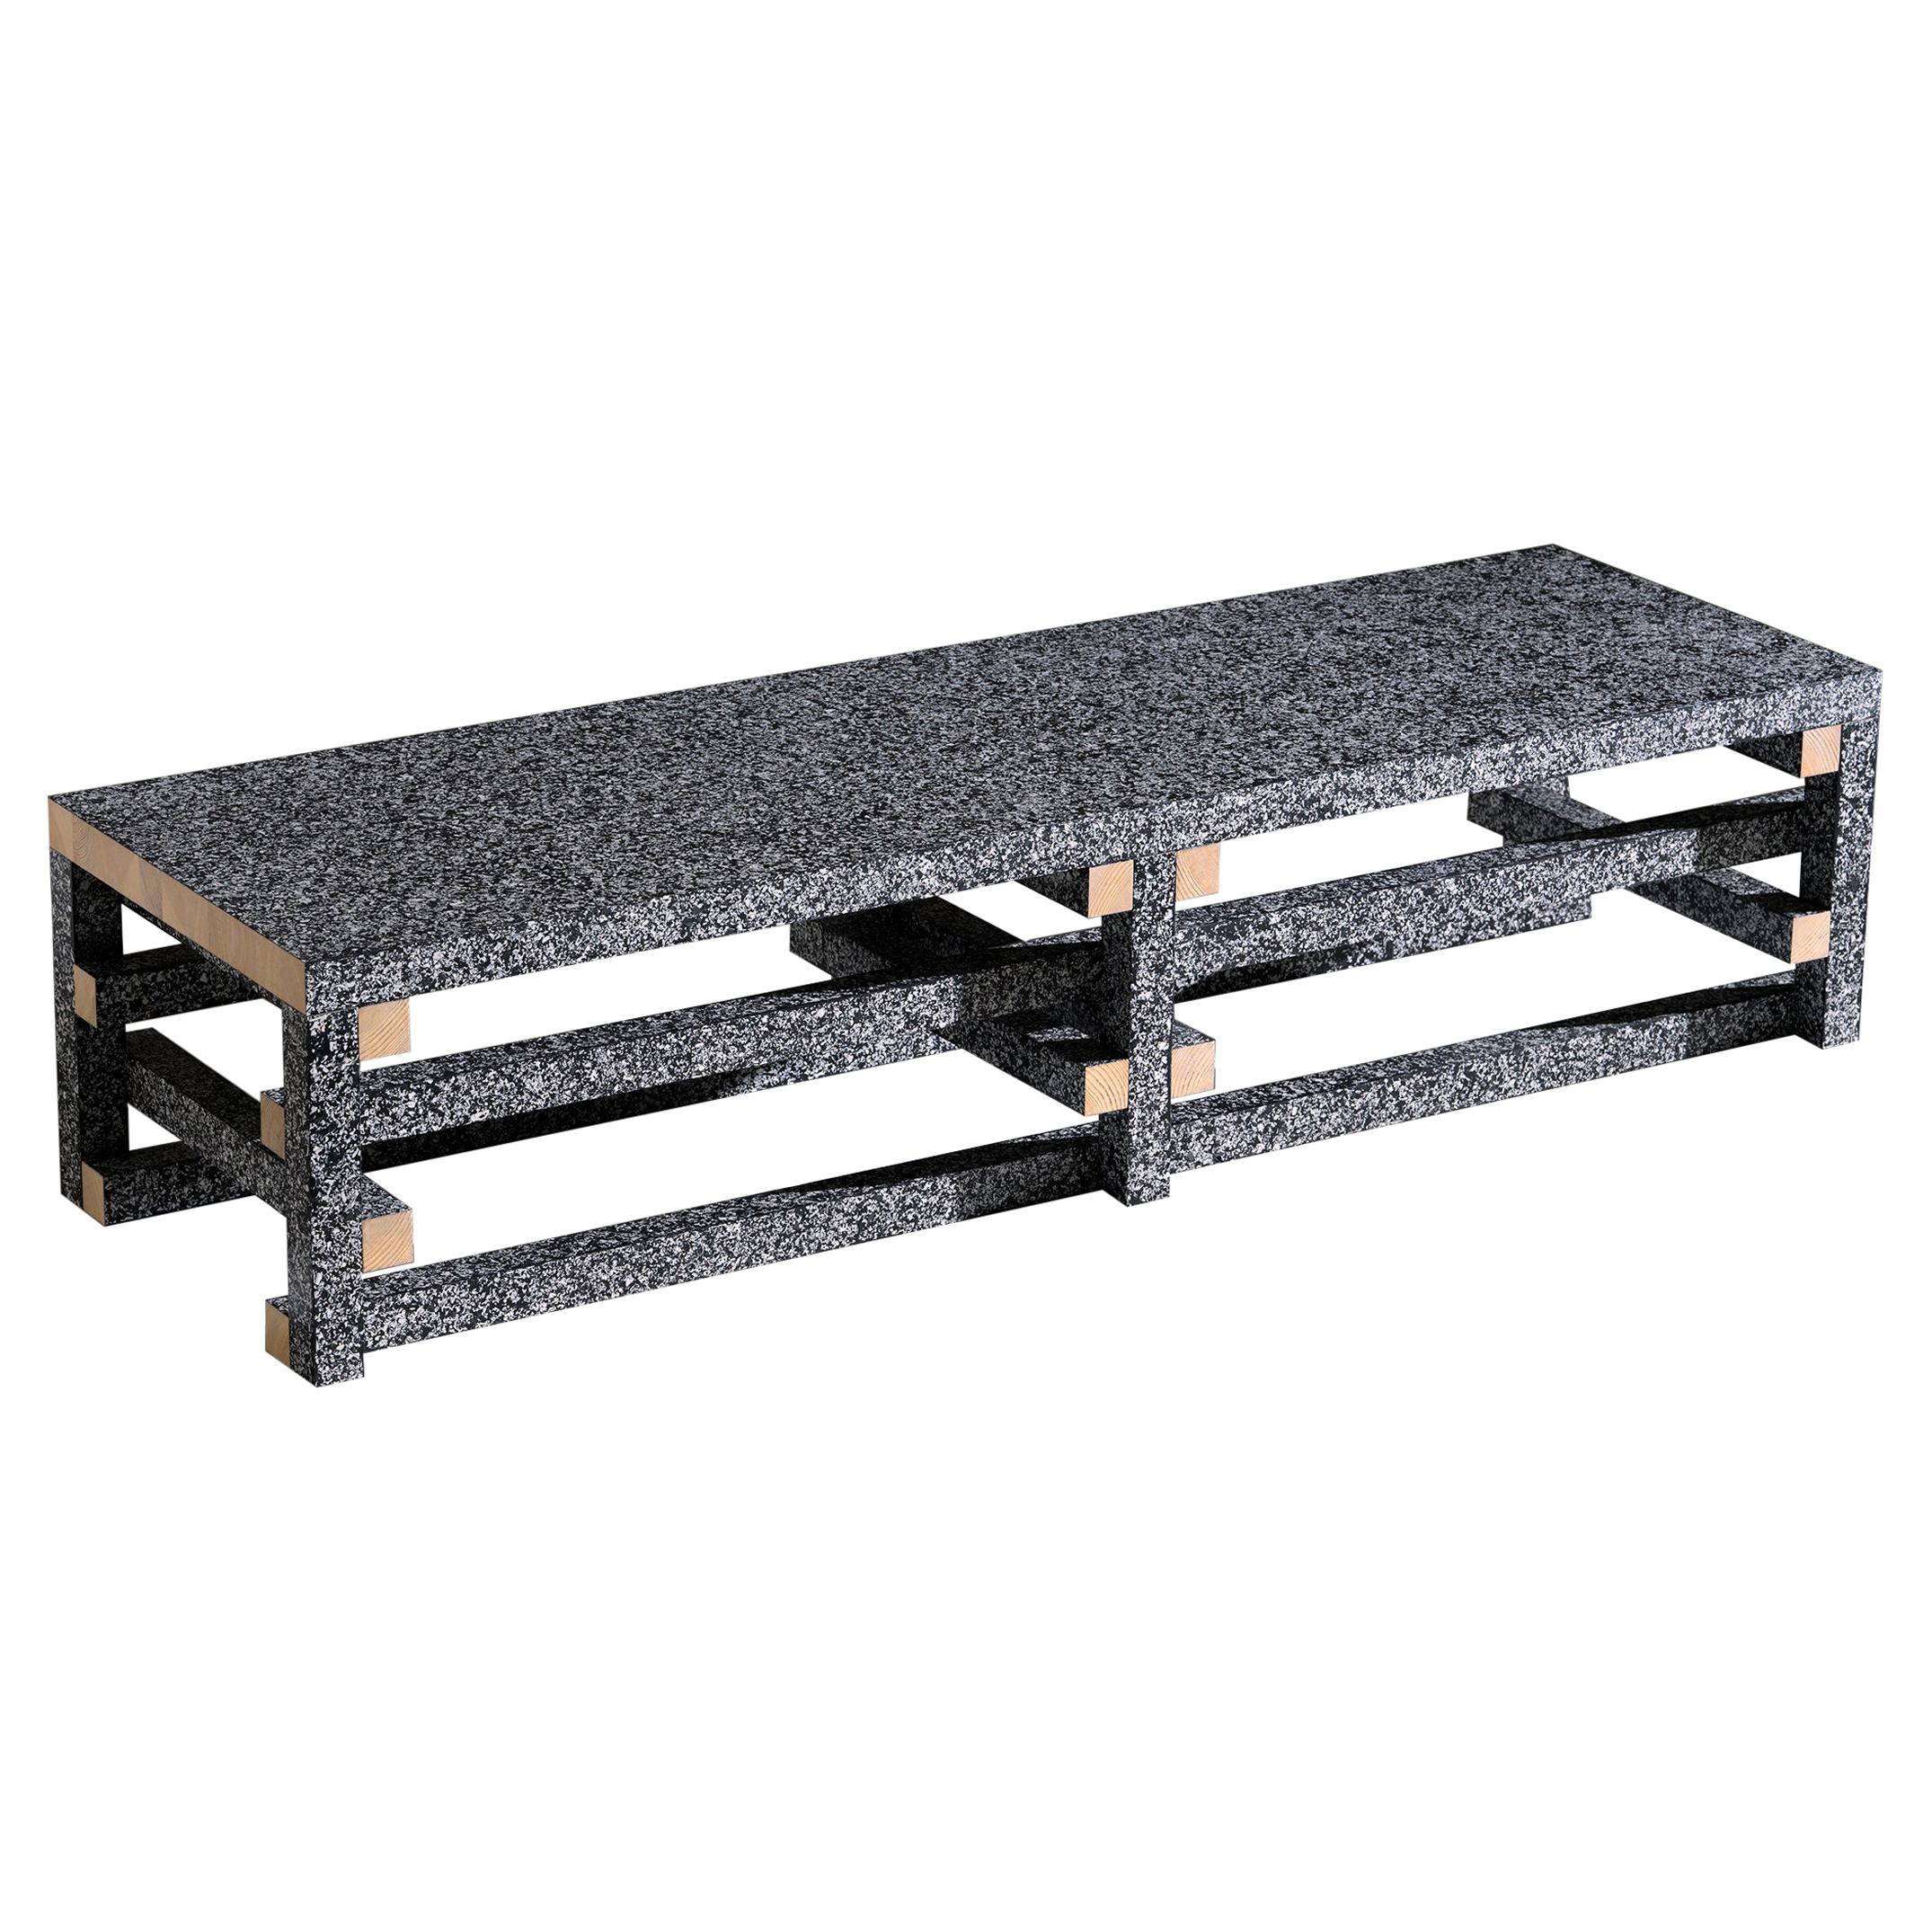 Contemporary Pine Wood Table, Black and White Speckled Effect, by Erik Olovsson